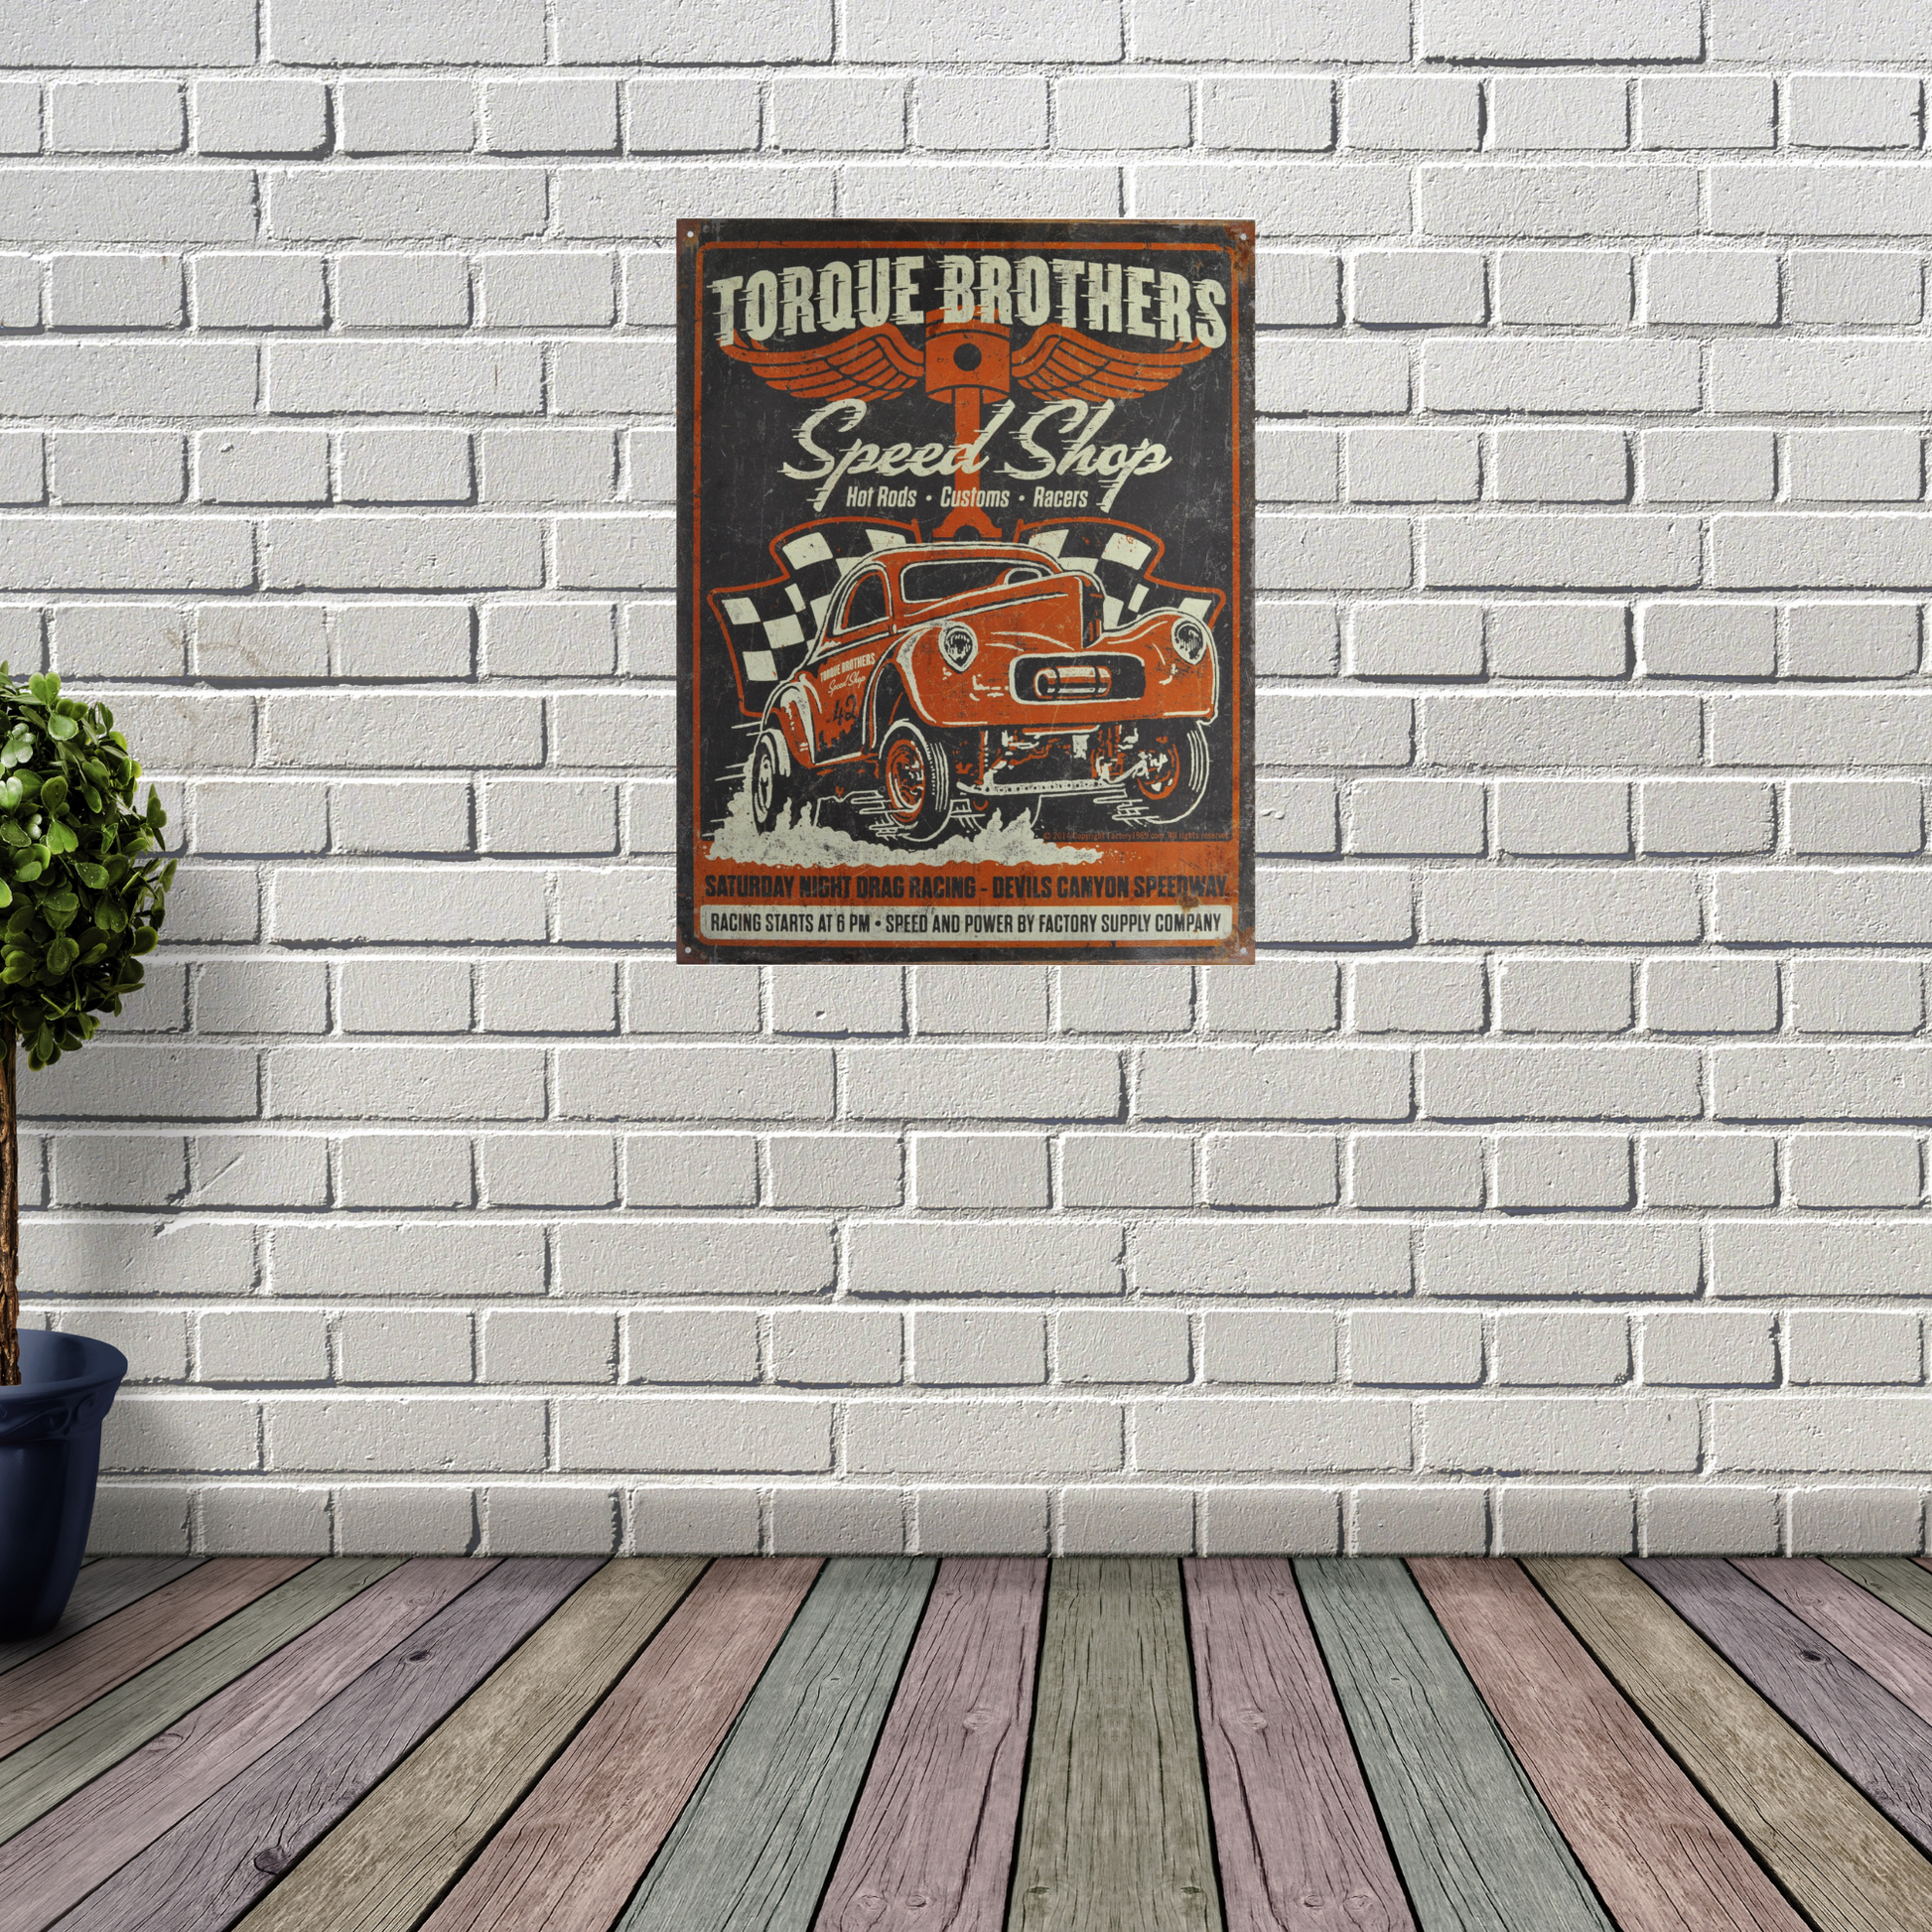 Vintage Poster Print that says "Torque Brothers Speed Shop" and a classic car in front in orange with a distressed design. on a wall for scale